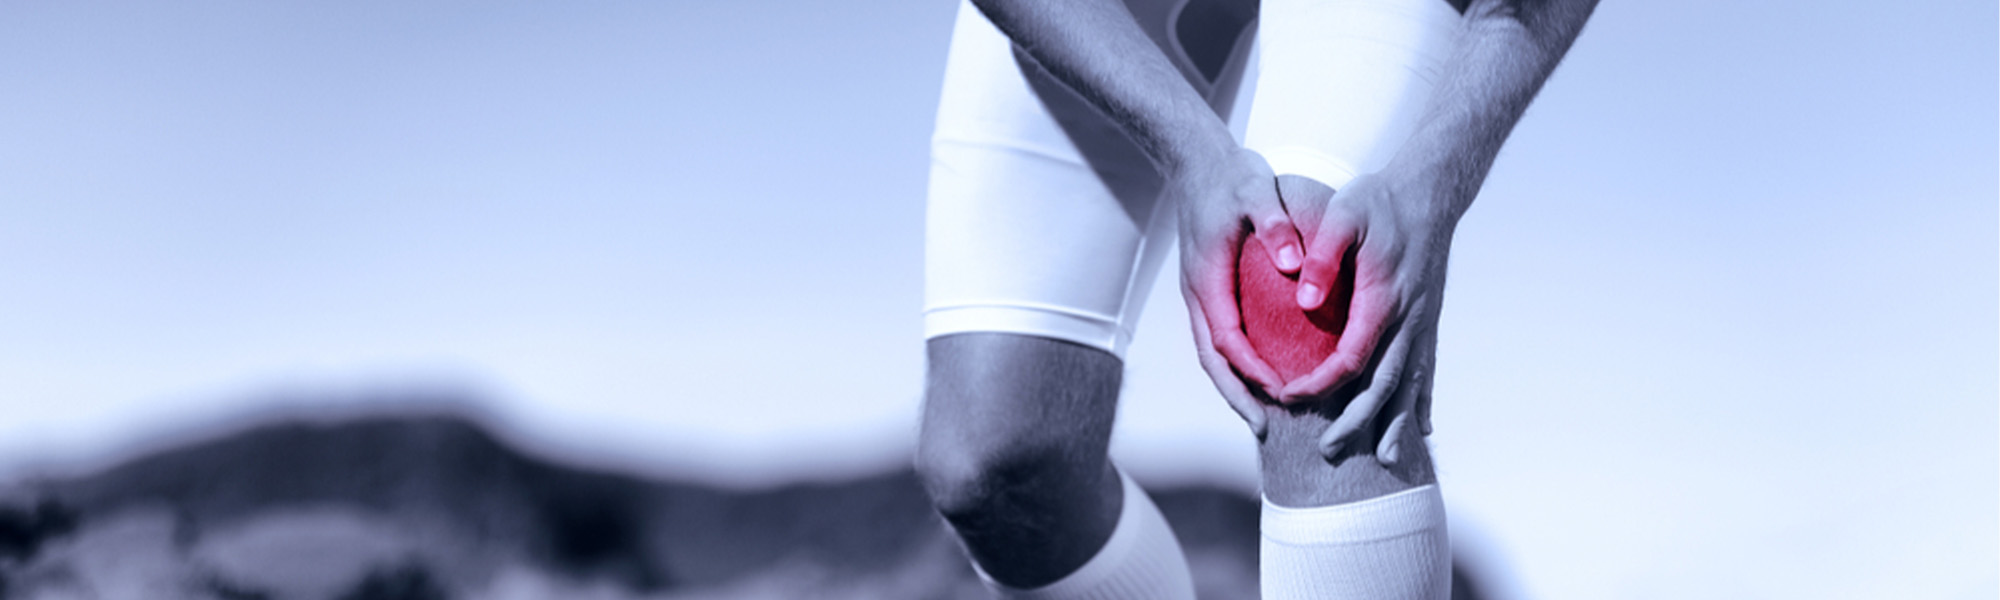 How to Keep Your Knee Healthy